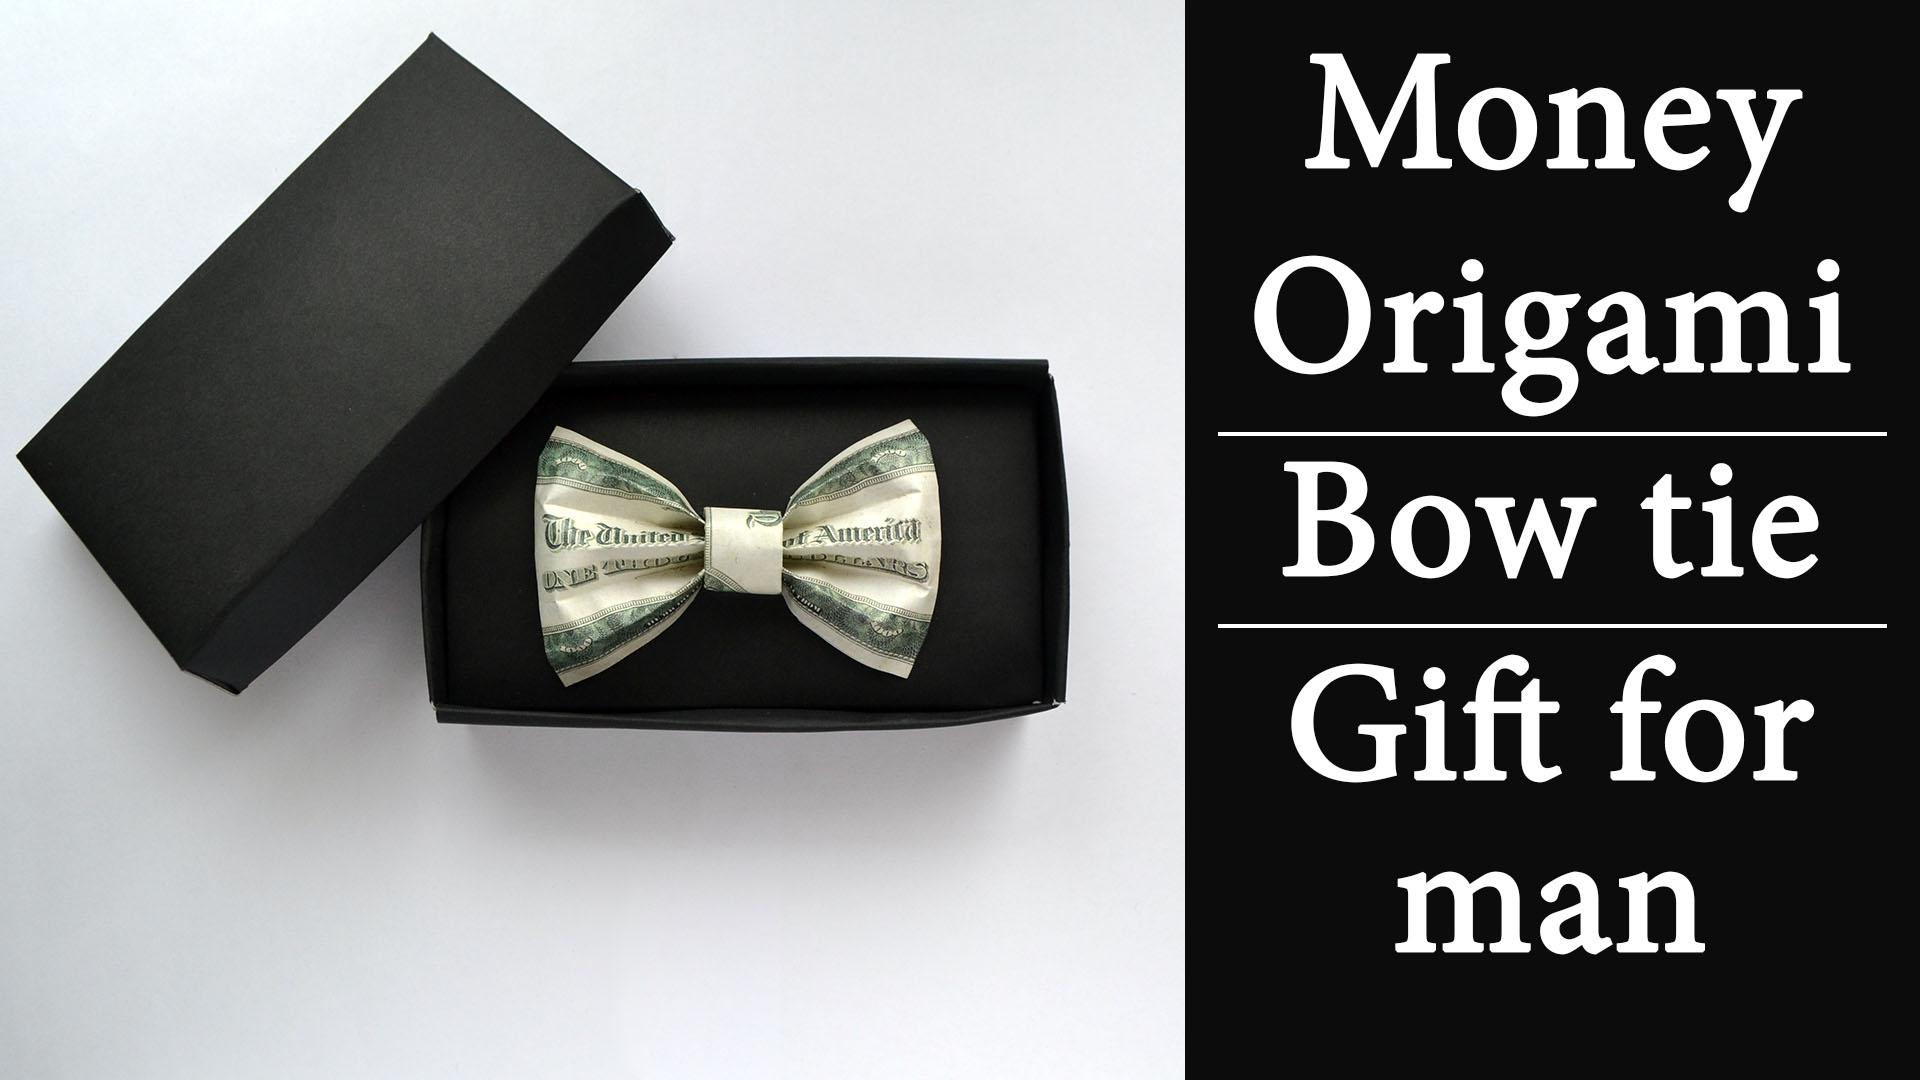 Origami Bow Tie Dollar Bill Money Bow Tie In Gift Box Excellent Gift For Man Origami Dollar